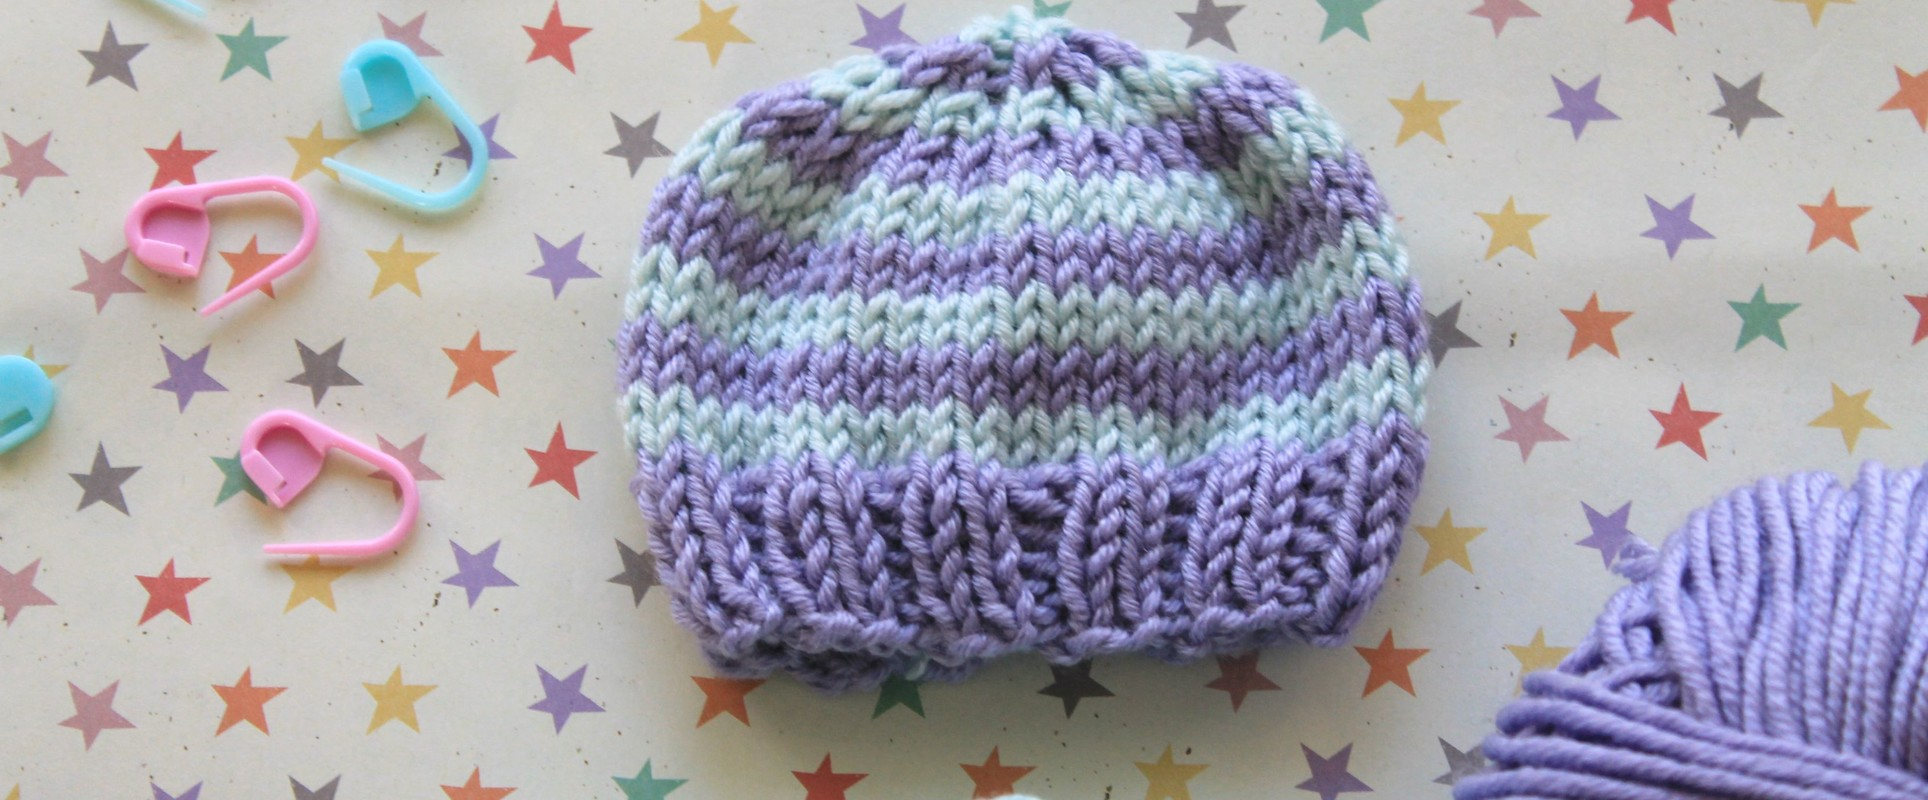 Free Knitting Patterns For Toques Knit Bit The Perfect Preemie Ba Hat Lovecrafts